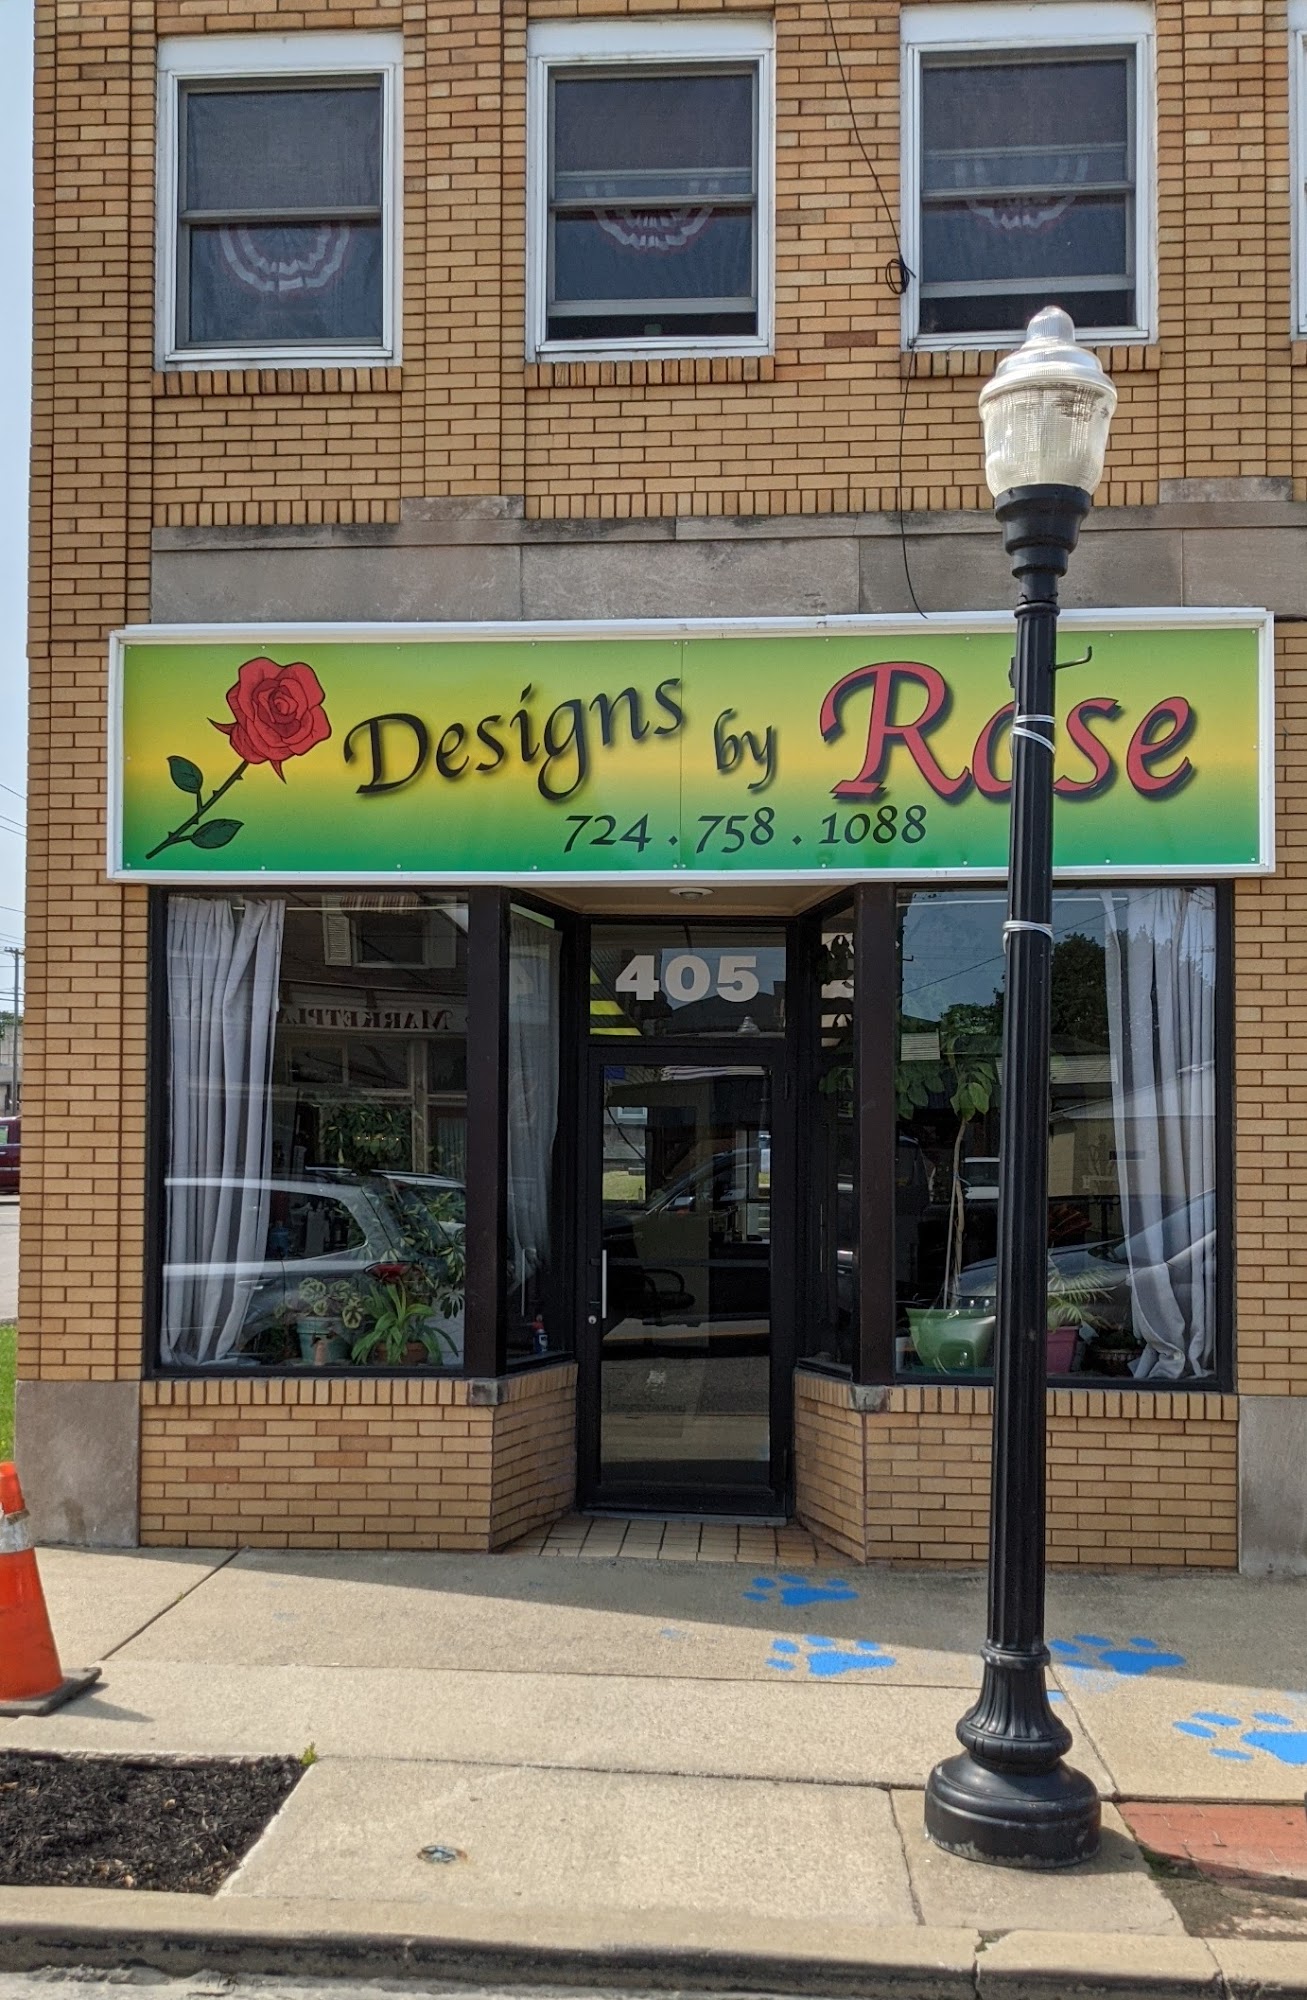 Designs By Rose 405 Lawrence Ave, Ellwood City Pennsylvania 16117